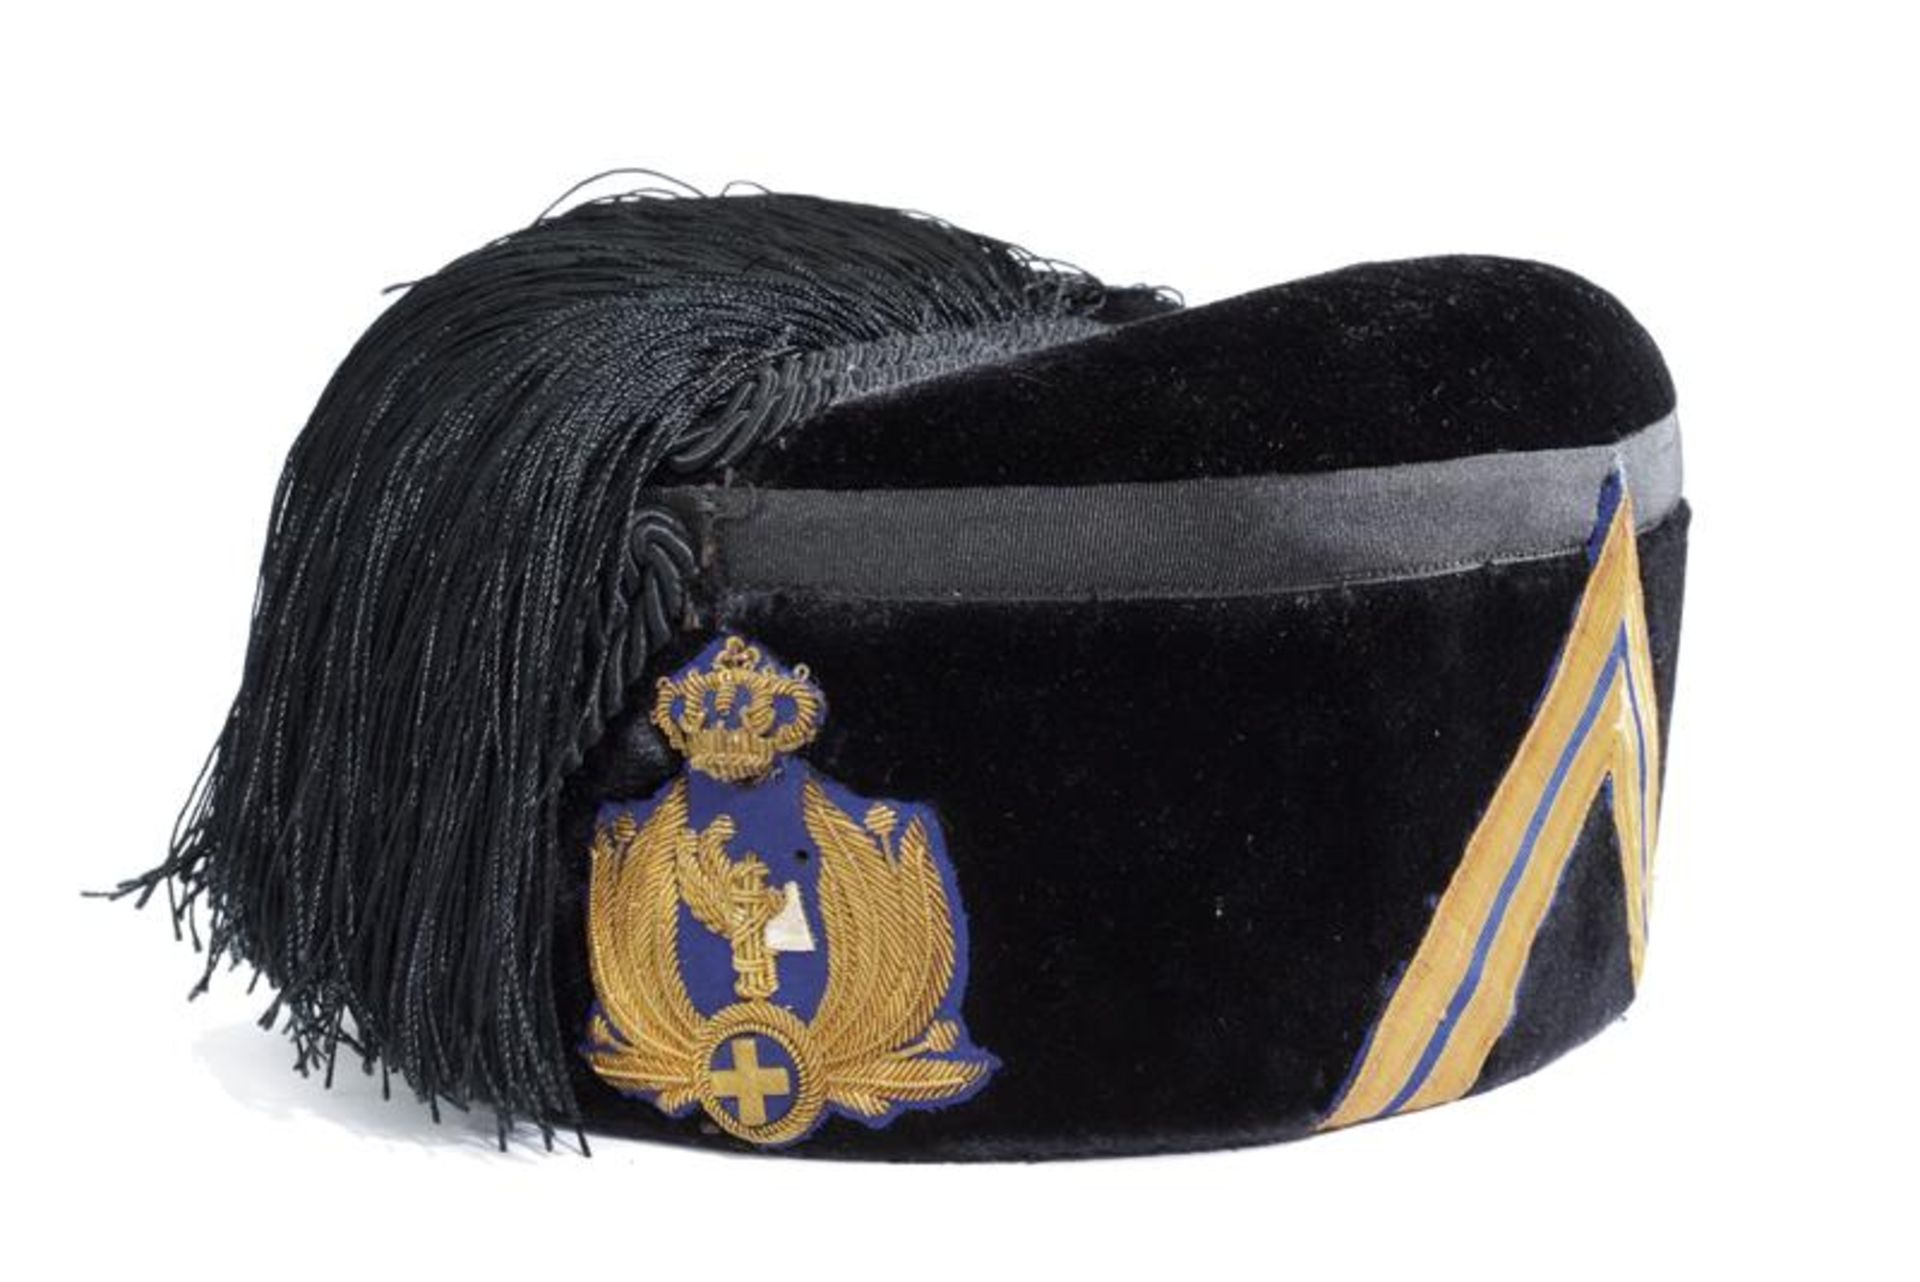 A rare 1938 model officer's fez for the street militia